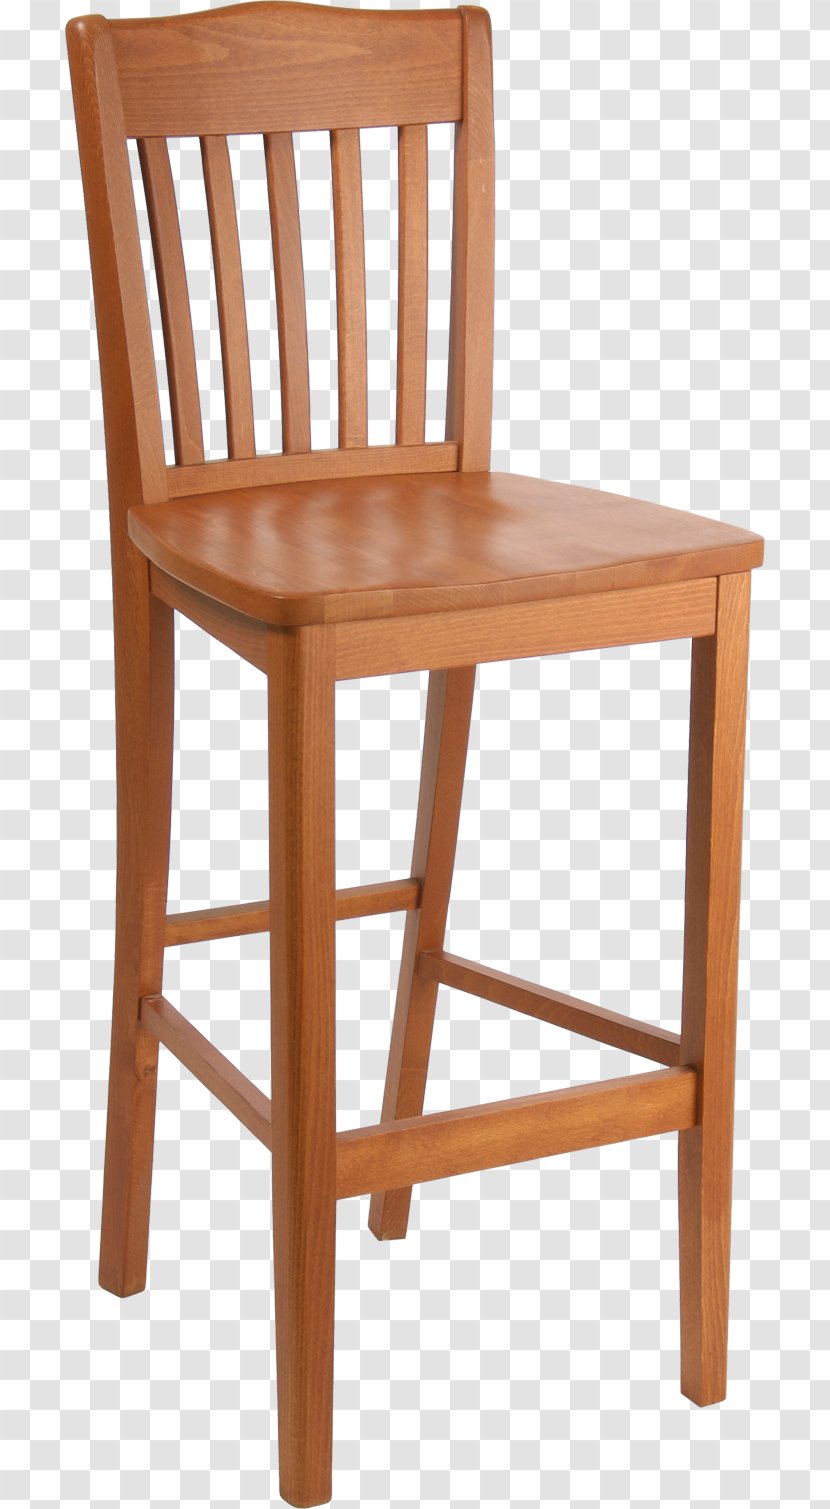 Chair Wood Bar Stool Furniture Table Transparent PNG